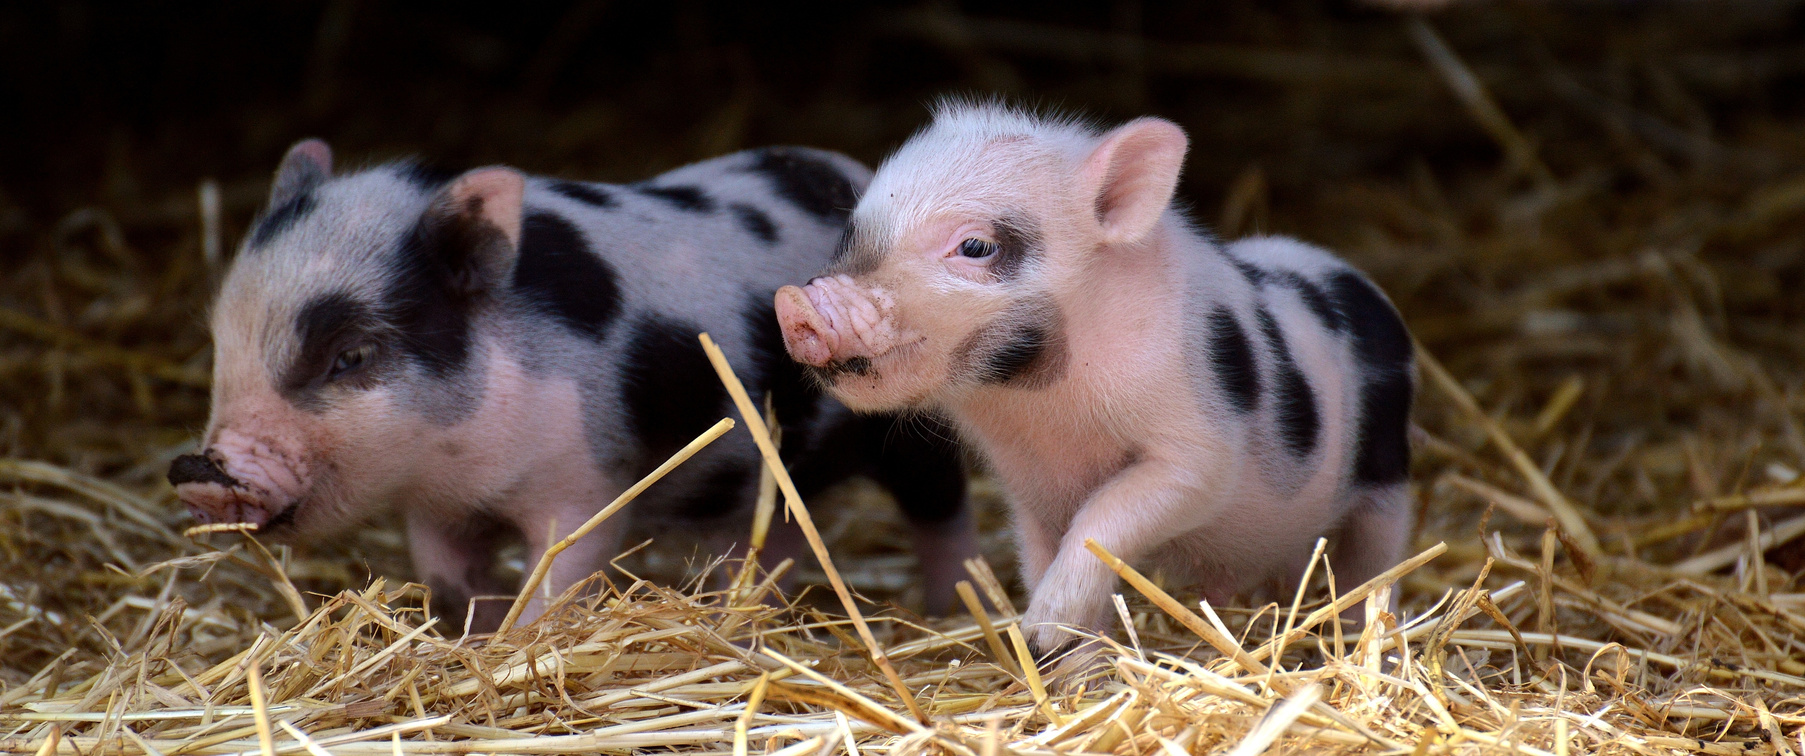 Piglets in the Farm